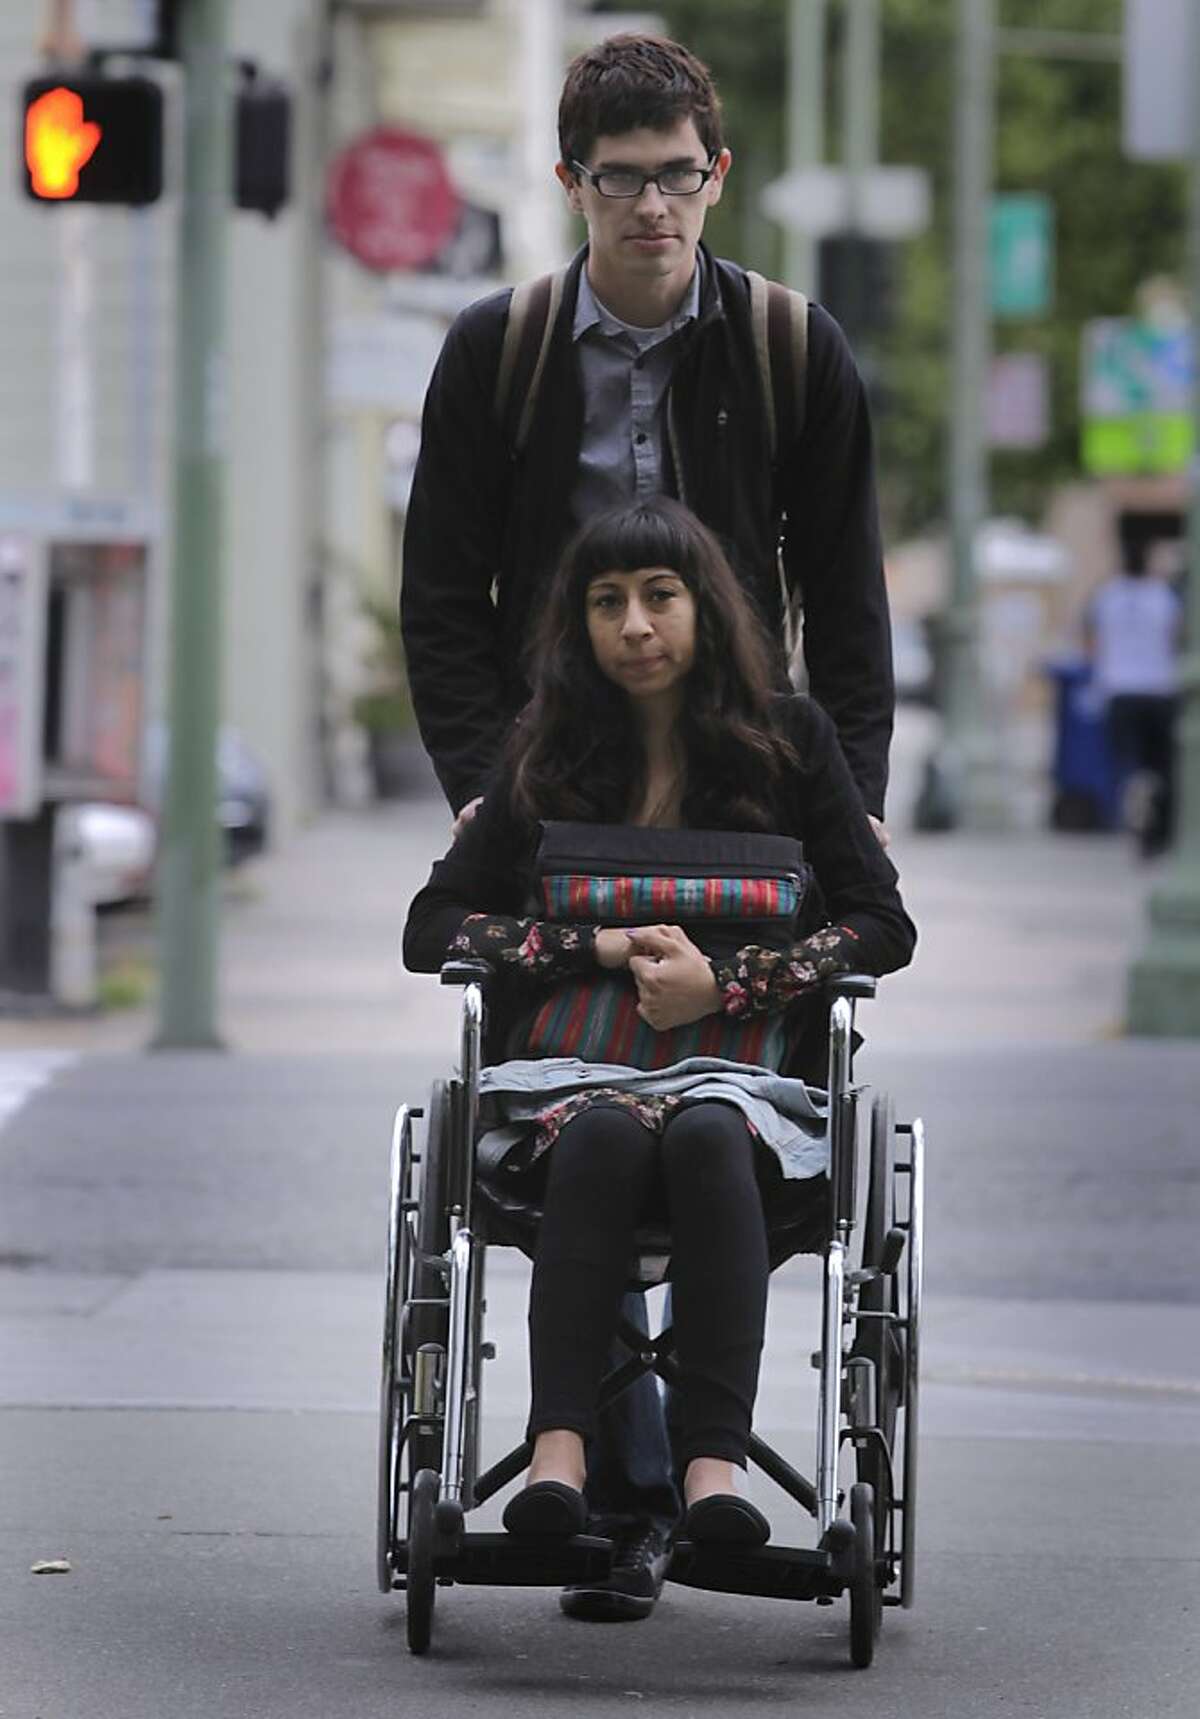 Eli Reyes arrives at the Wiley W. Manuel Courthouse with her boyfriend Ivan Navarro to attend a preliminary hearing in Oakland, Calif. on Thursday, May 16, 2013. Reyes is still recovering from injuries from a hit-and-run driver back in April.